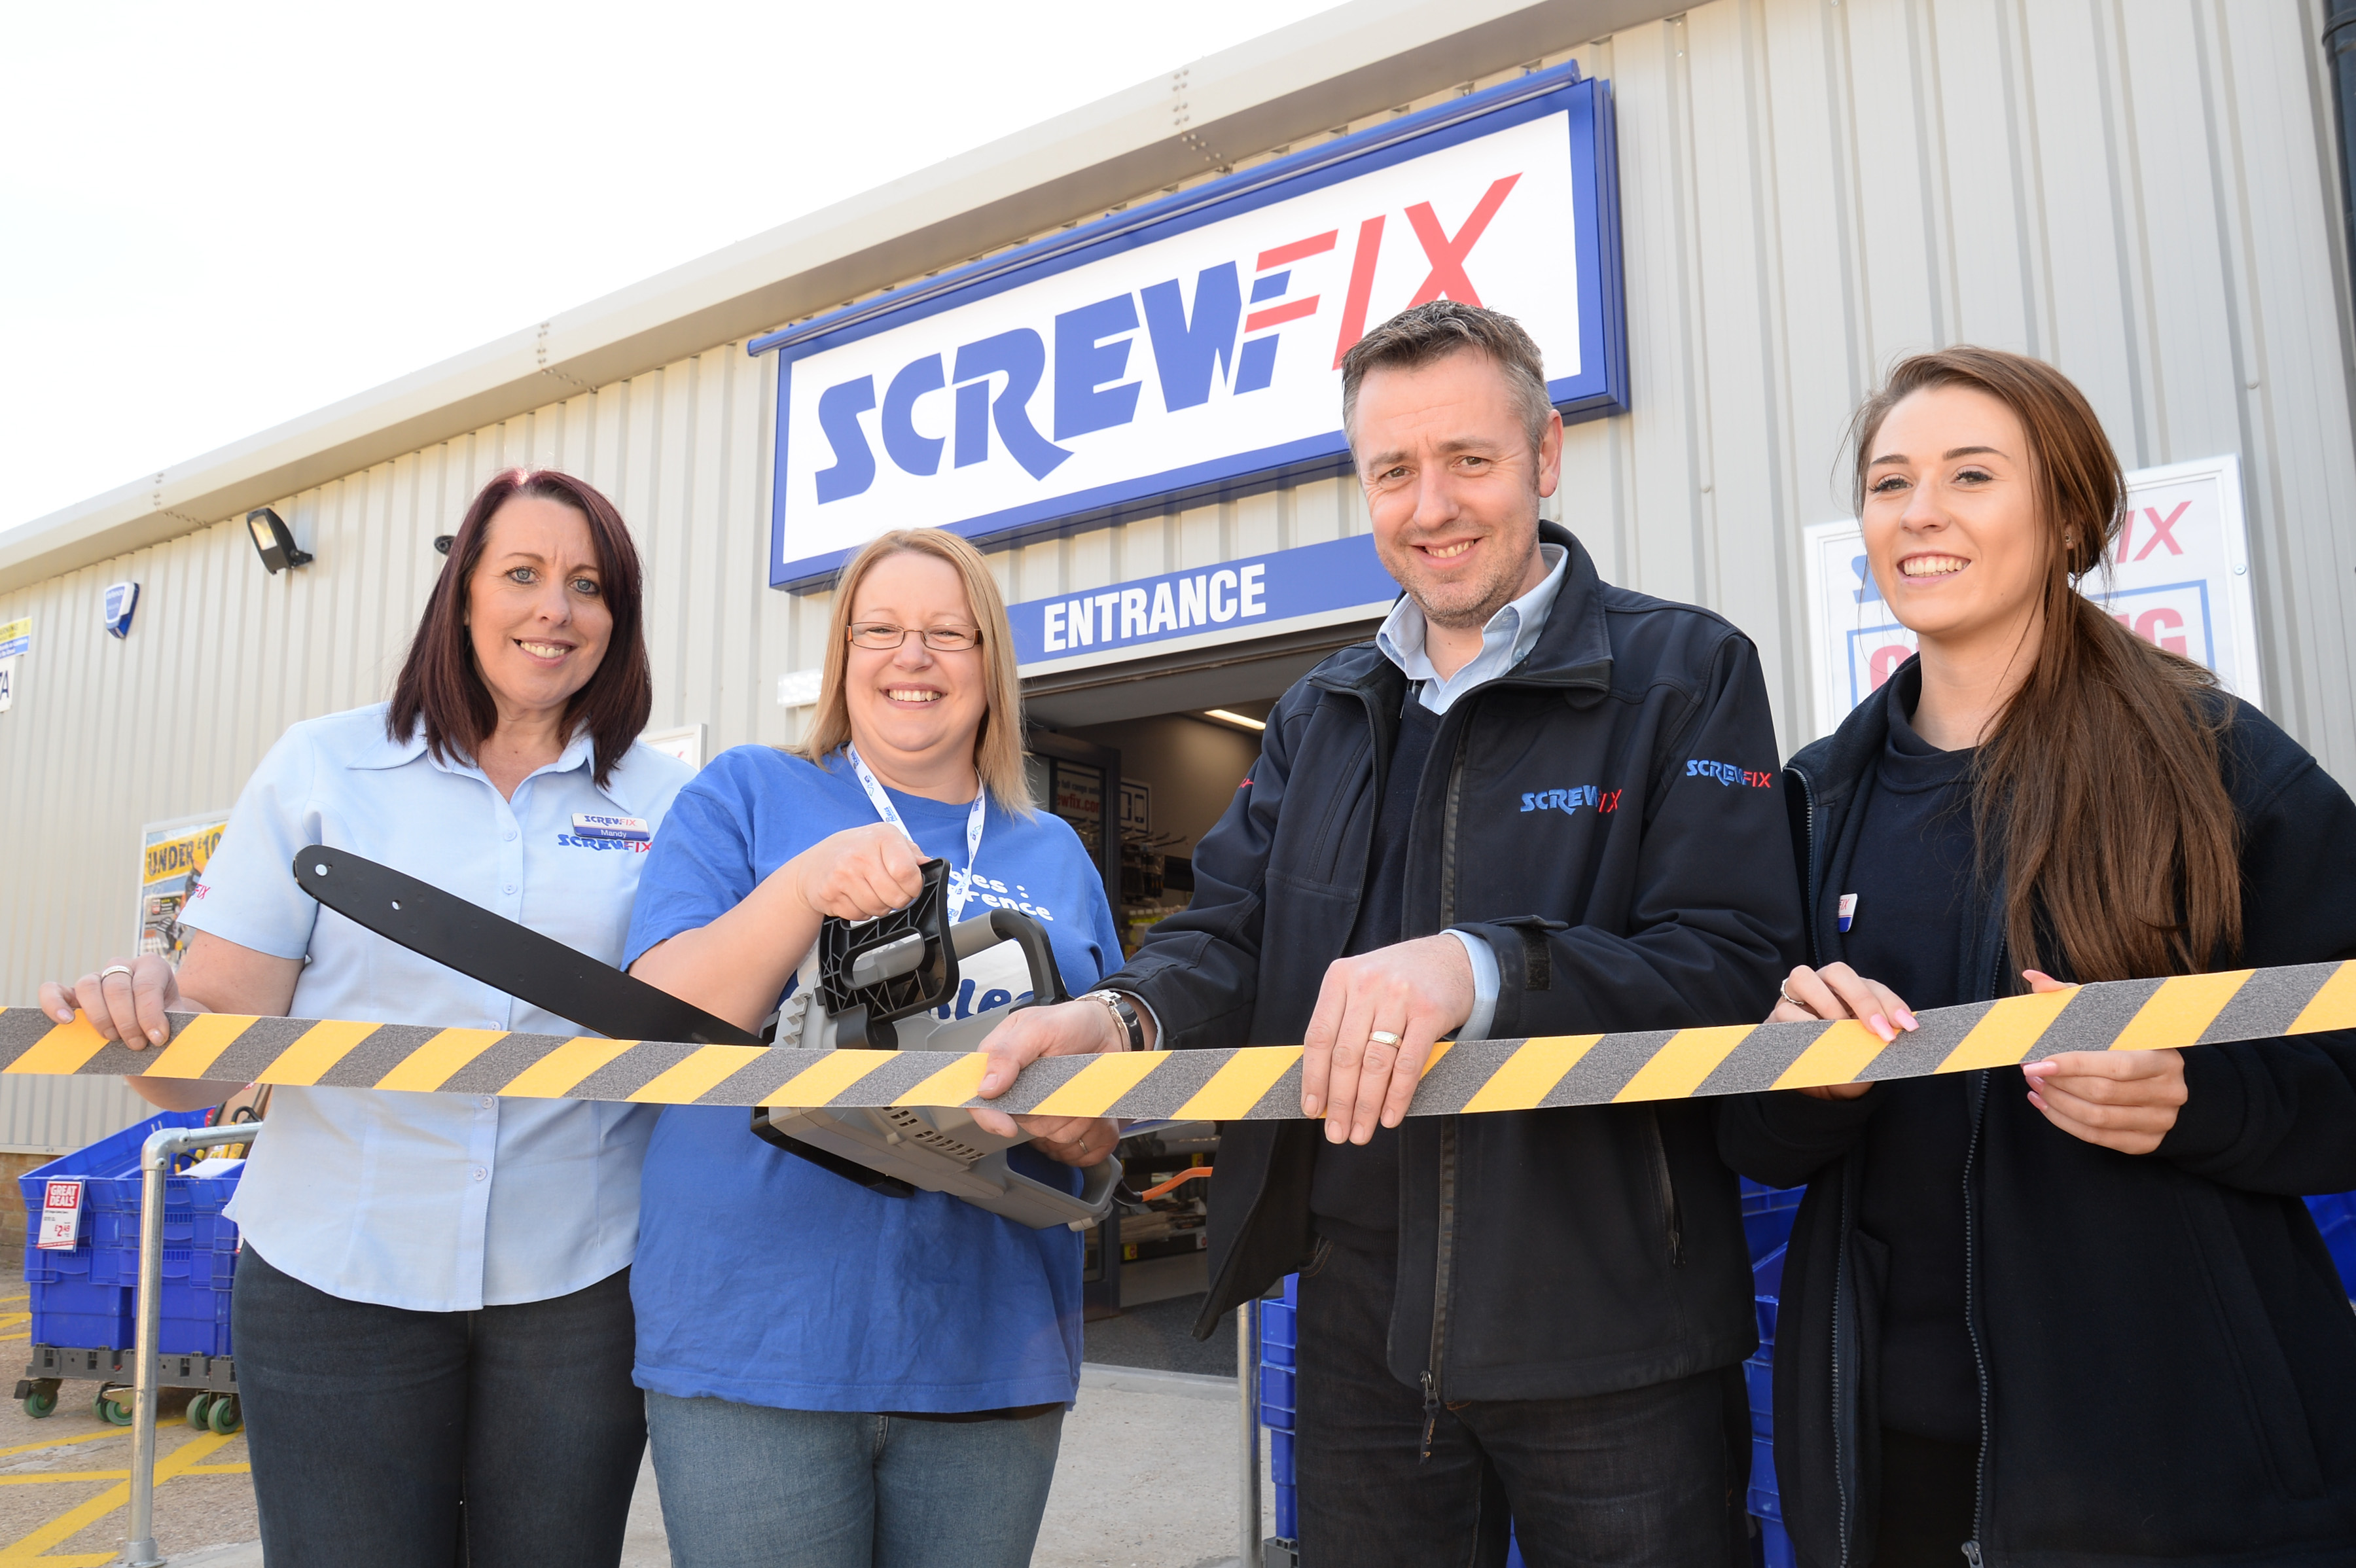 Waterlooville’s first Screwfix store is declared a runaway success